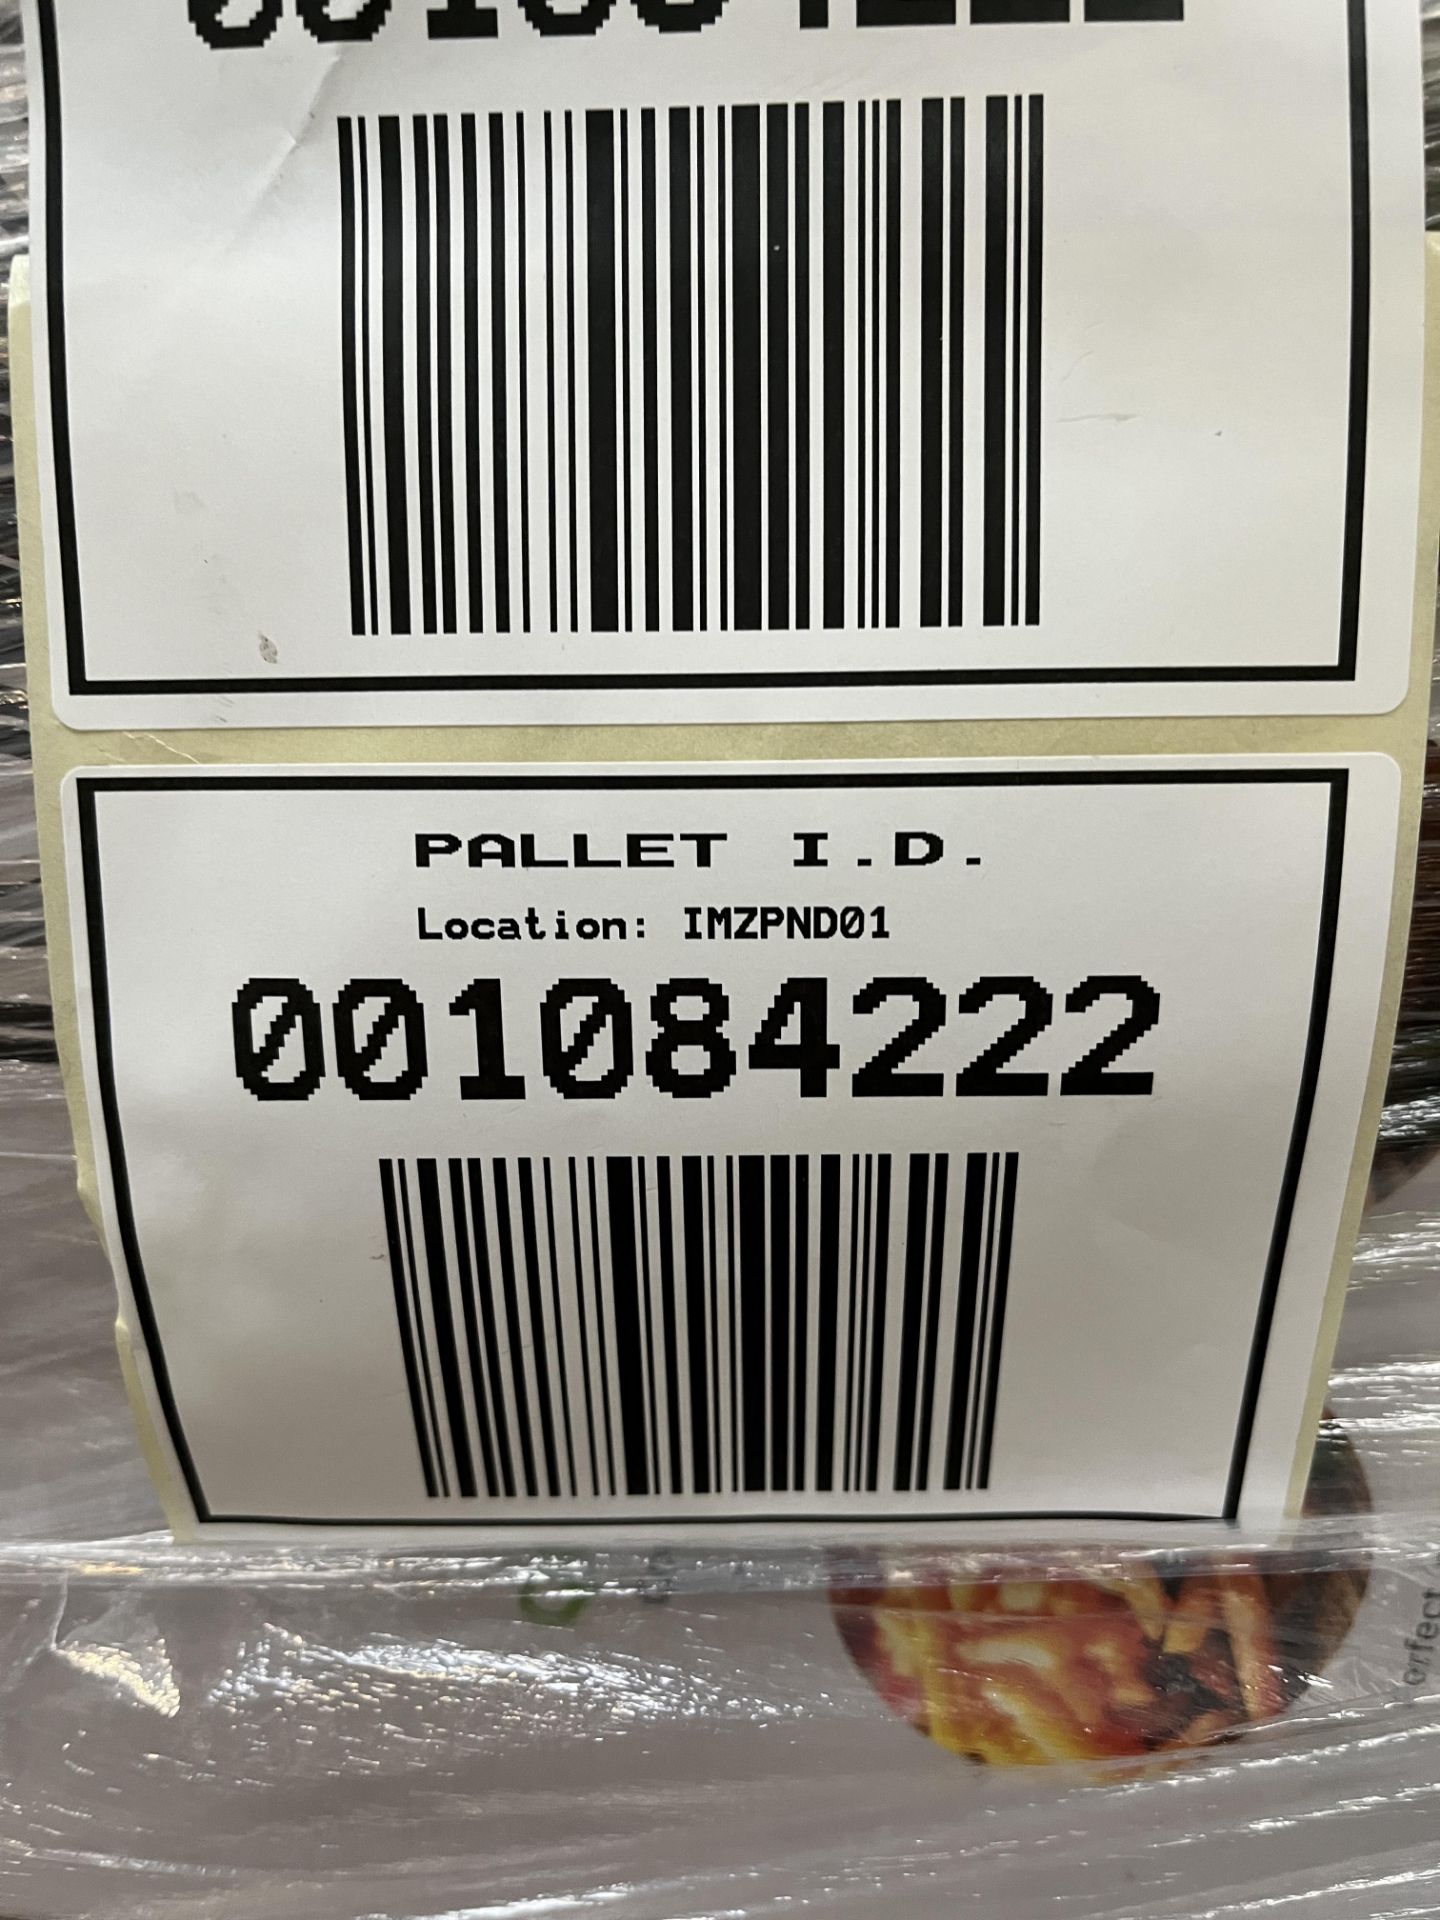 (REF001084222) 1 Pallet of Customer Returns - Retail value at new £1,901.33 - Image 11 of 11